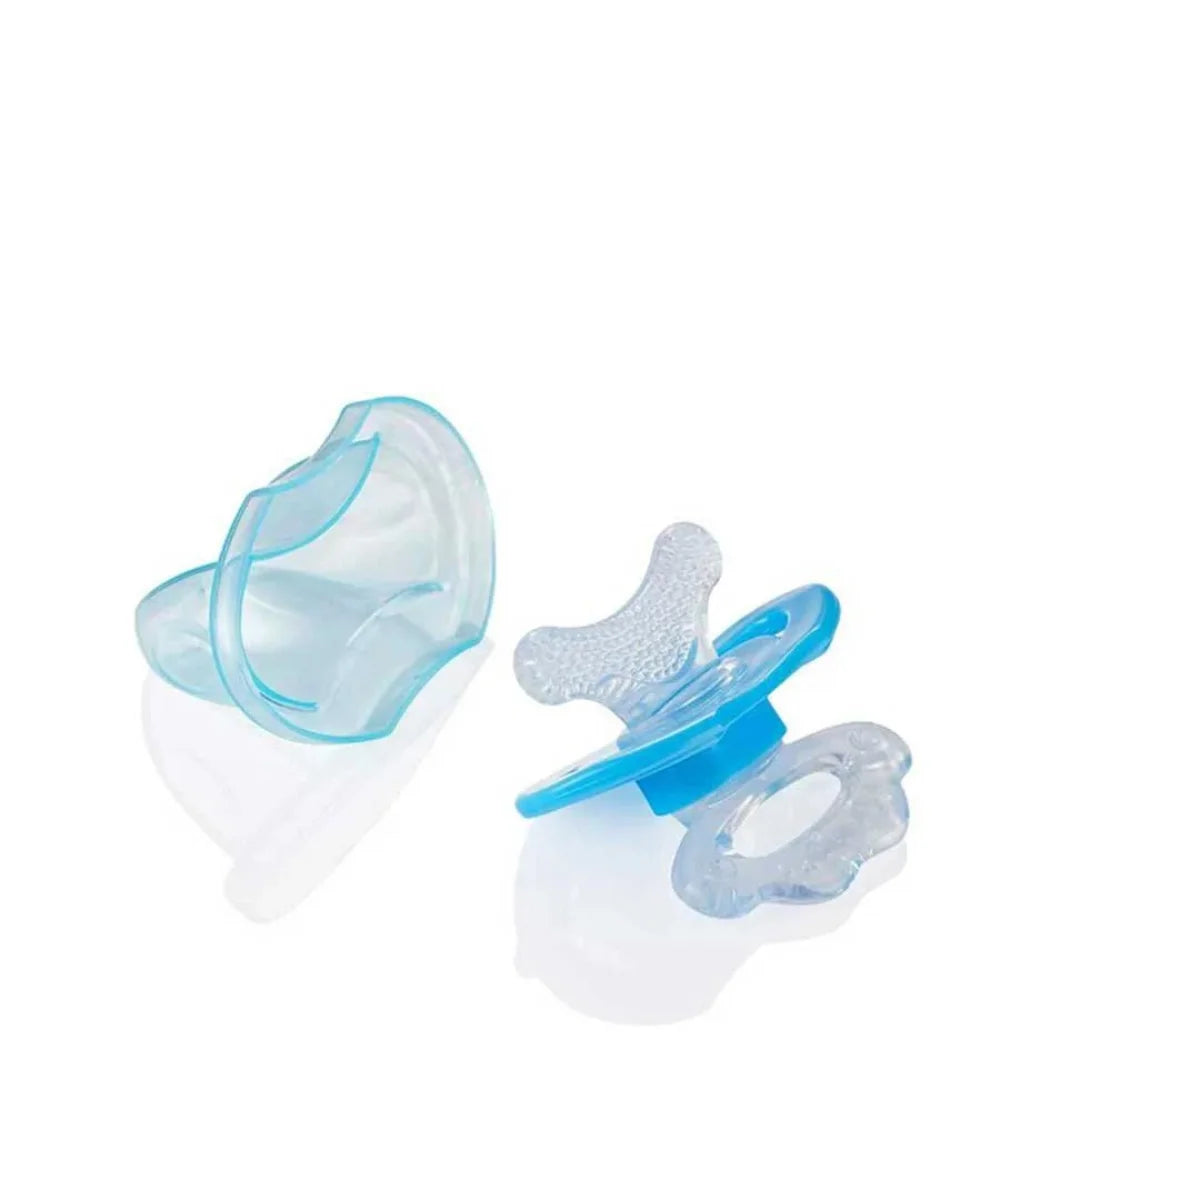 Blue FrontEase baby Teether with protective cap